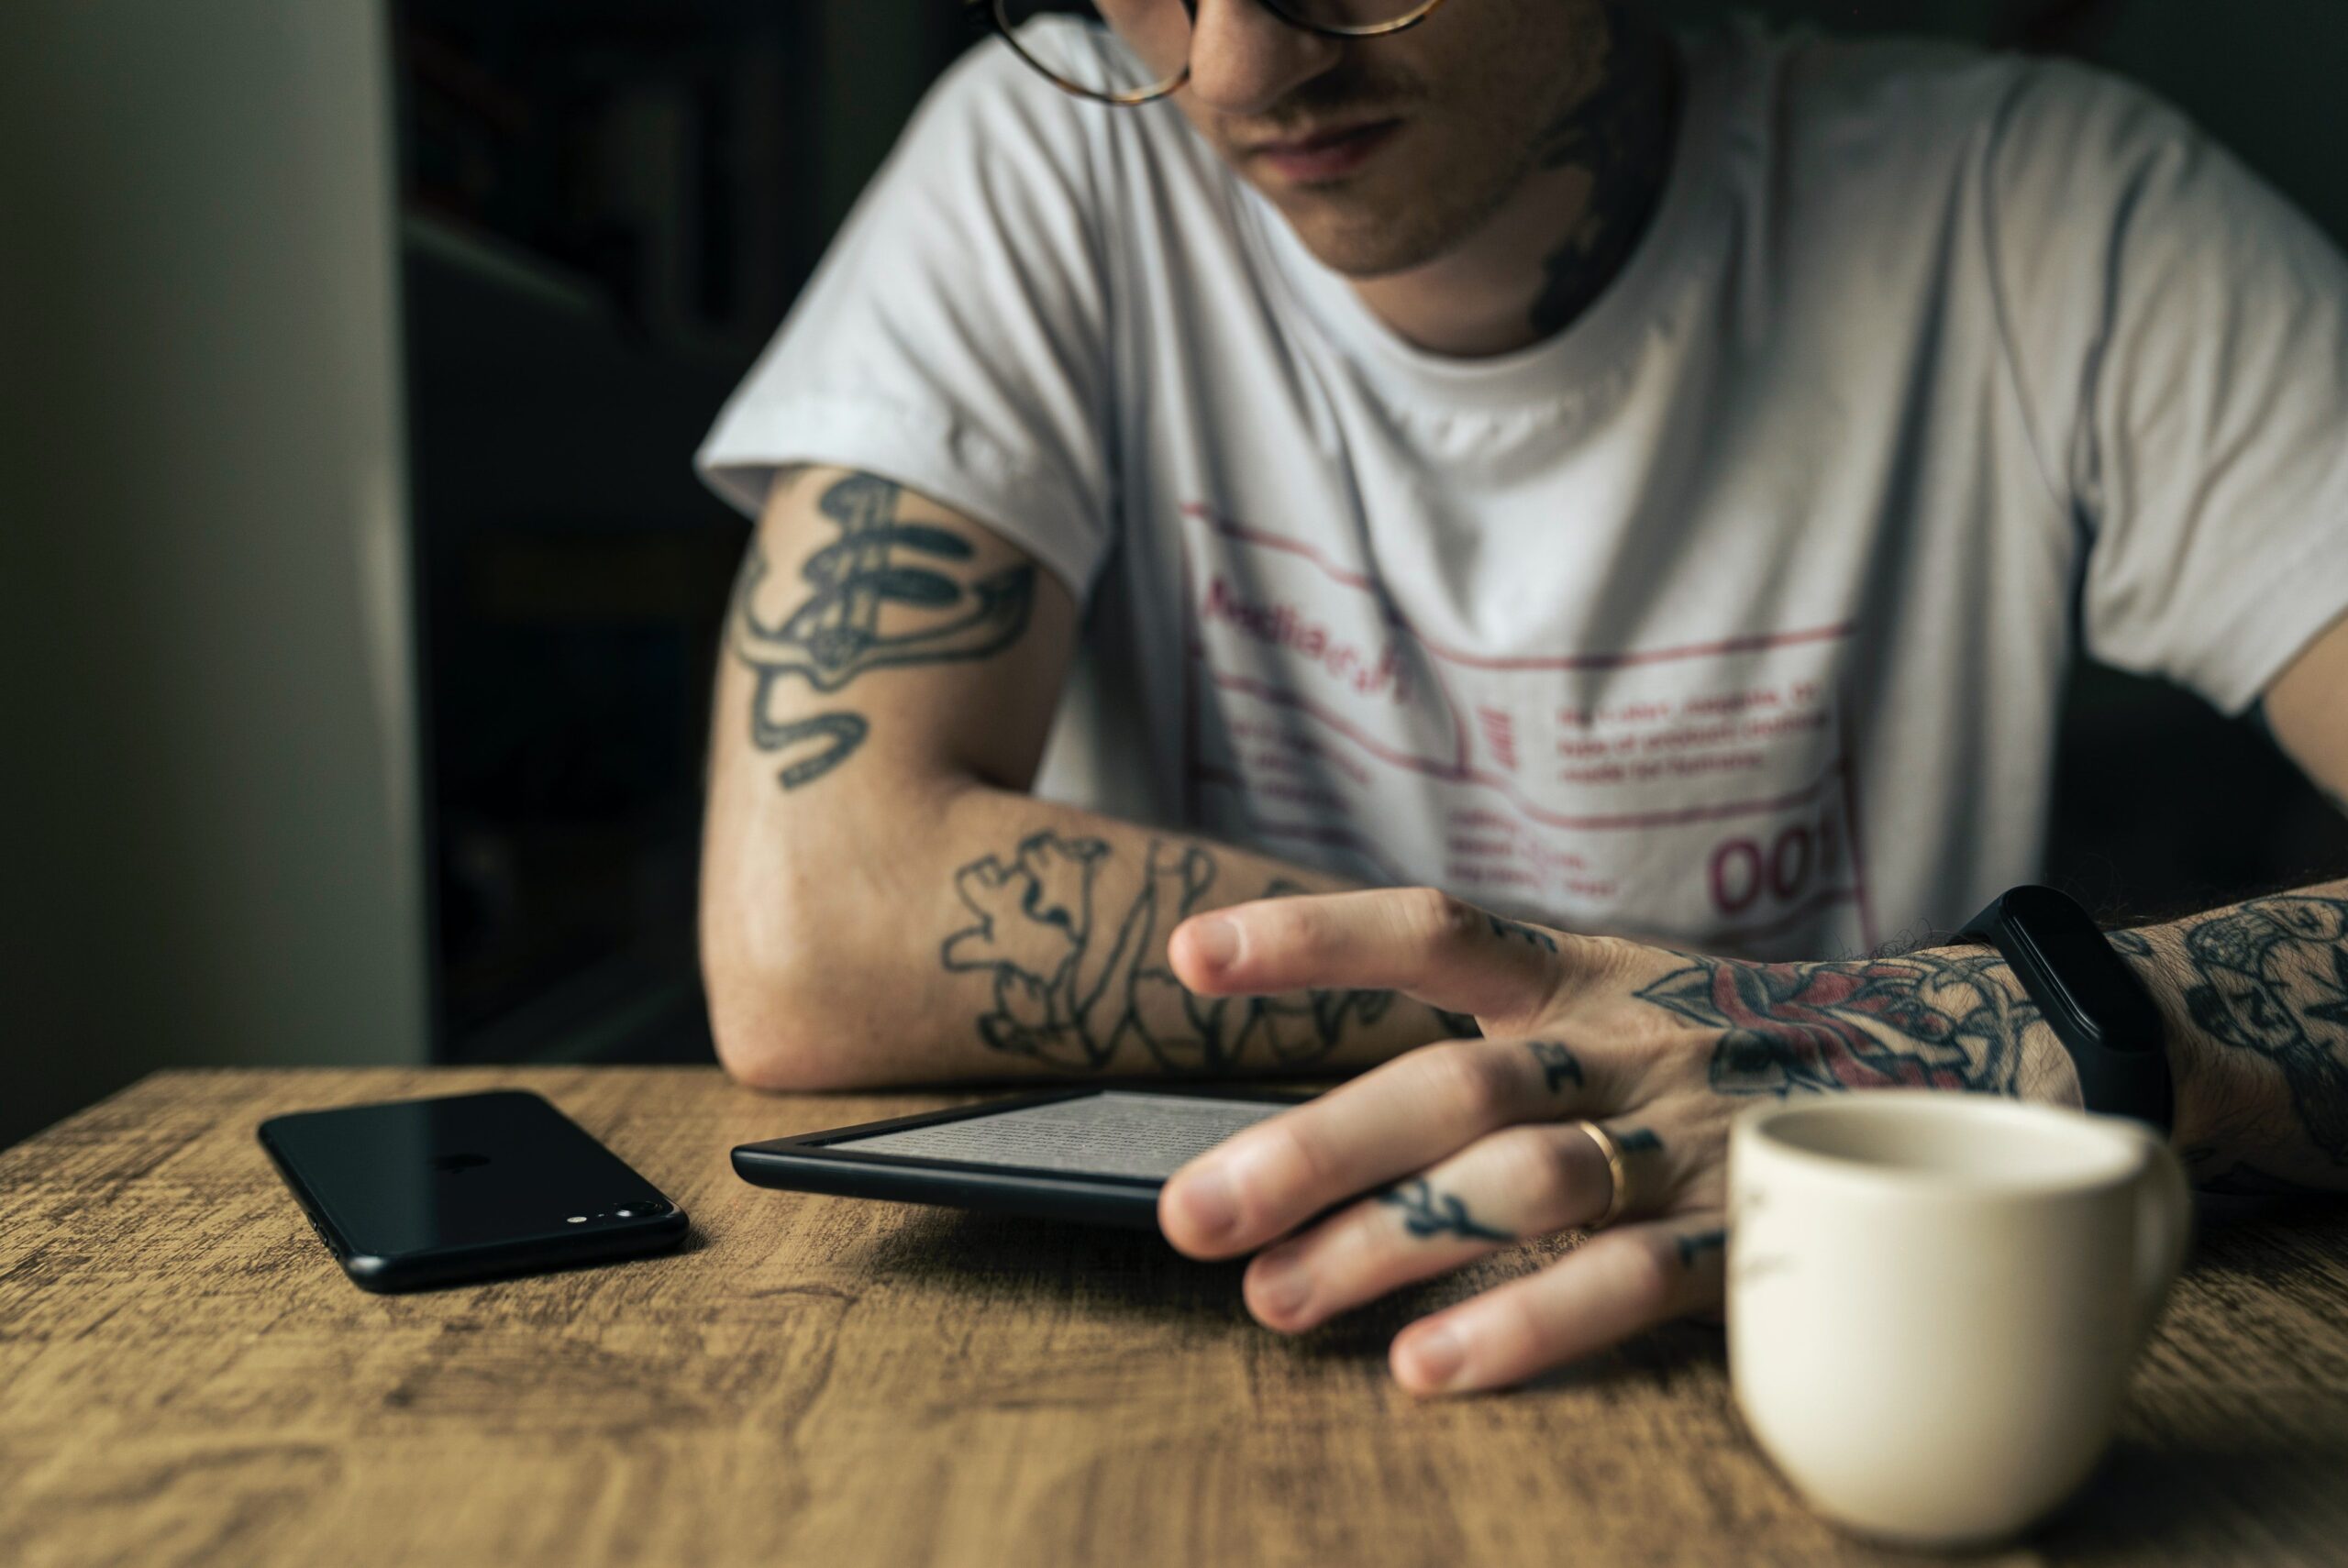 Tattoos in the Workplace: Is it Still an Issue in 2021? | Removery